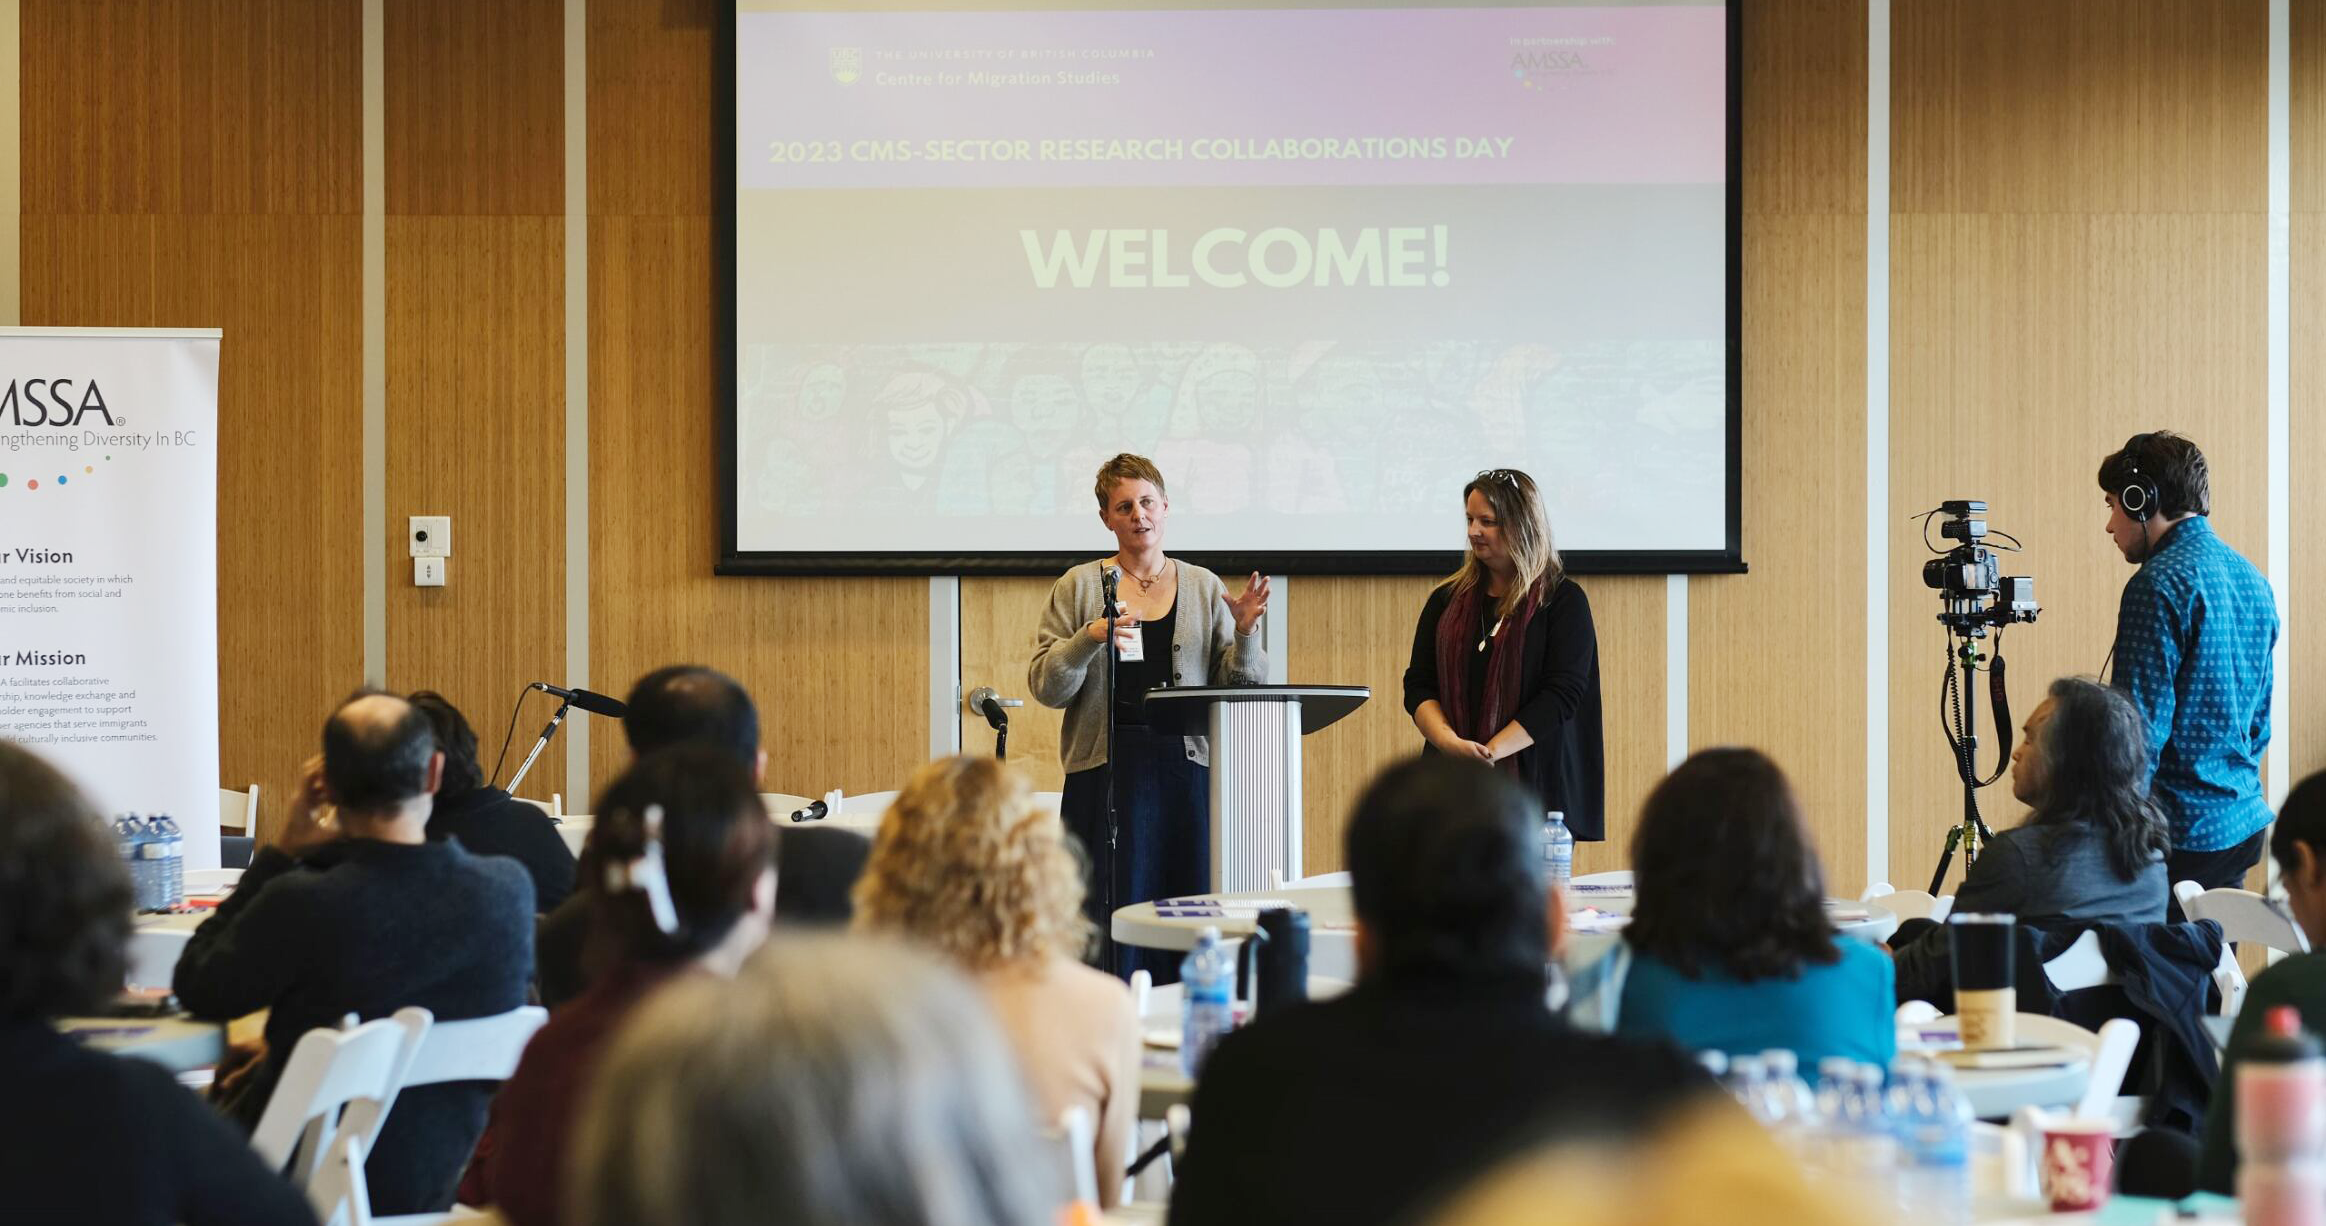 Antje Ellerman, Co-Director of UBC Centre for Migration Studies, and Katie Crocker, CEO of AMSSA, standing at a desk facing the audience during the 2023 Research Collaborations Day.